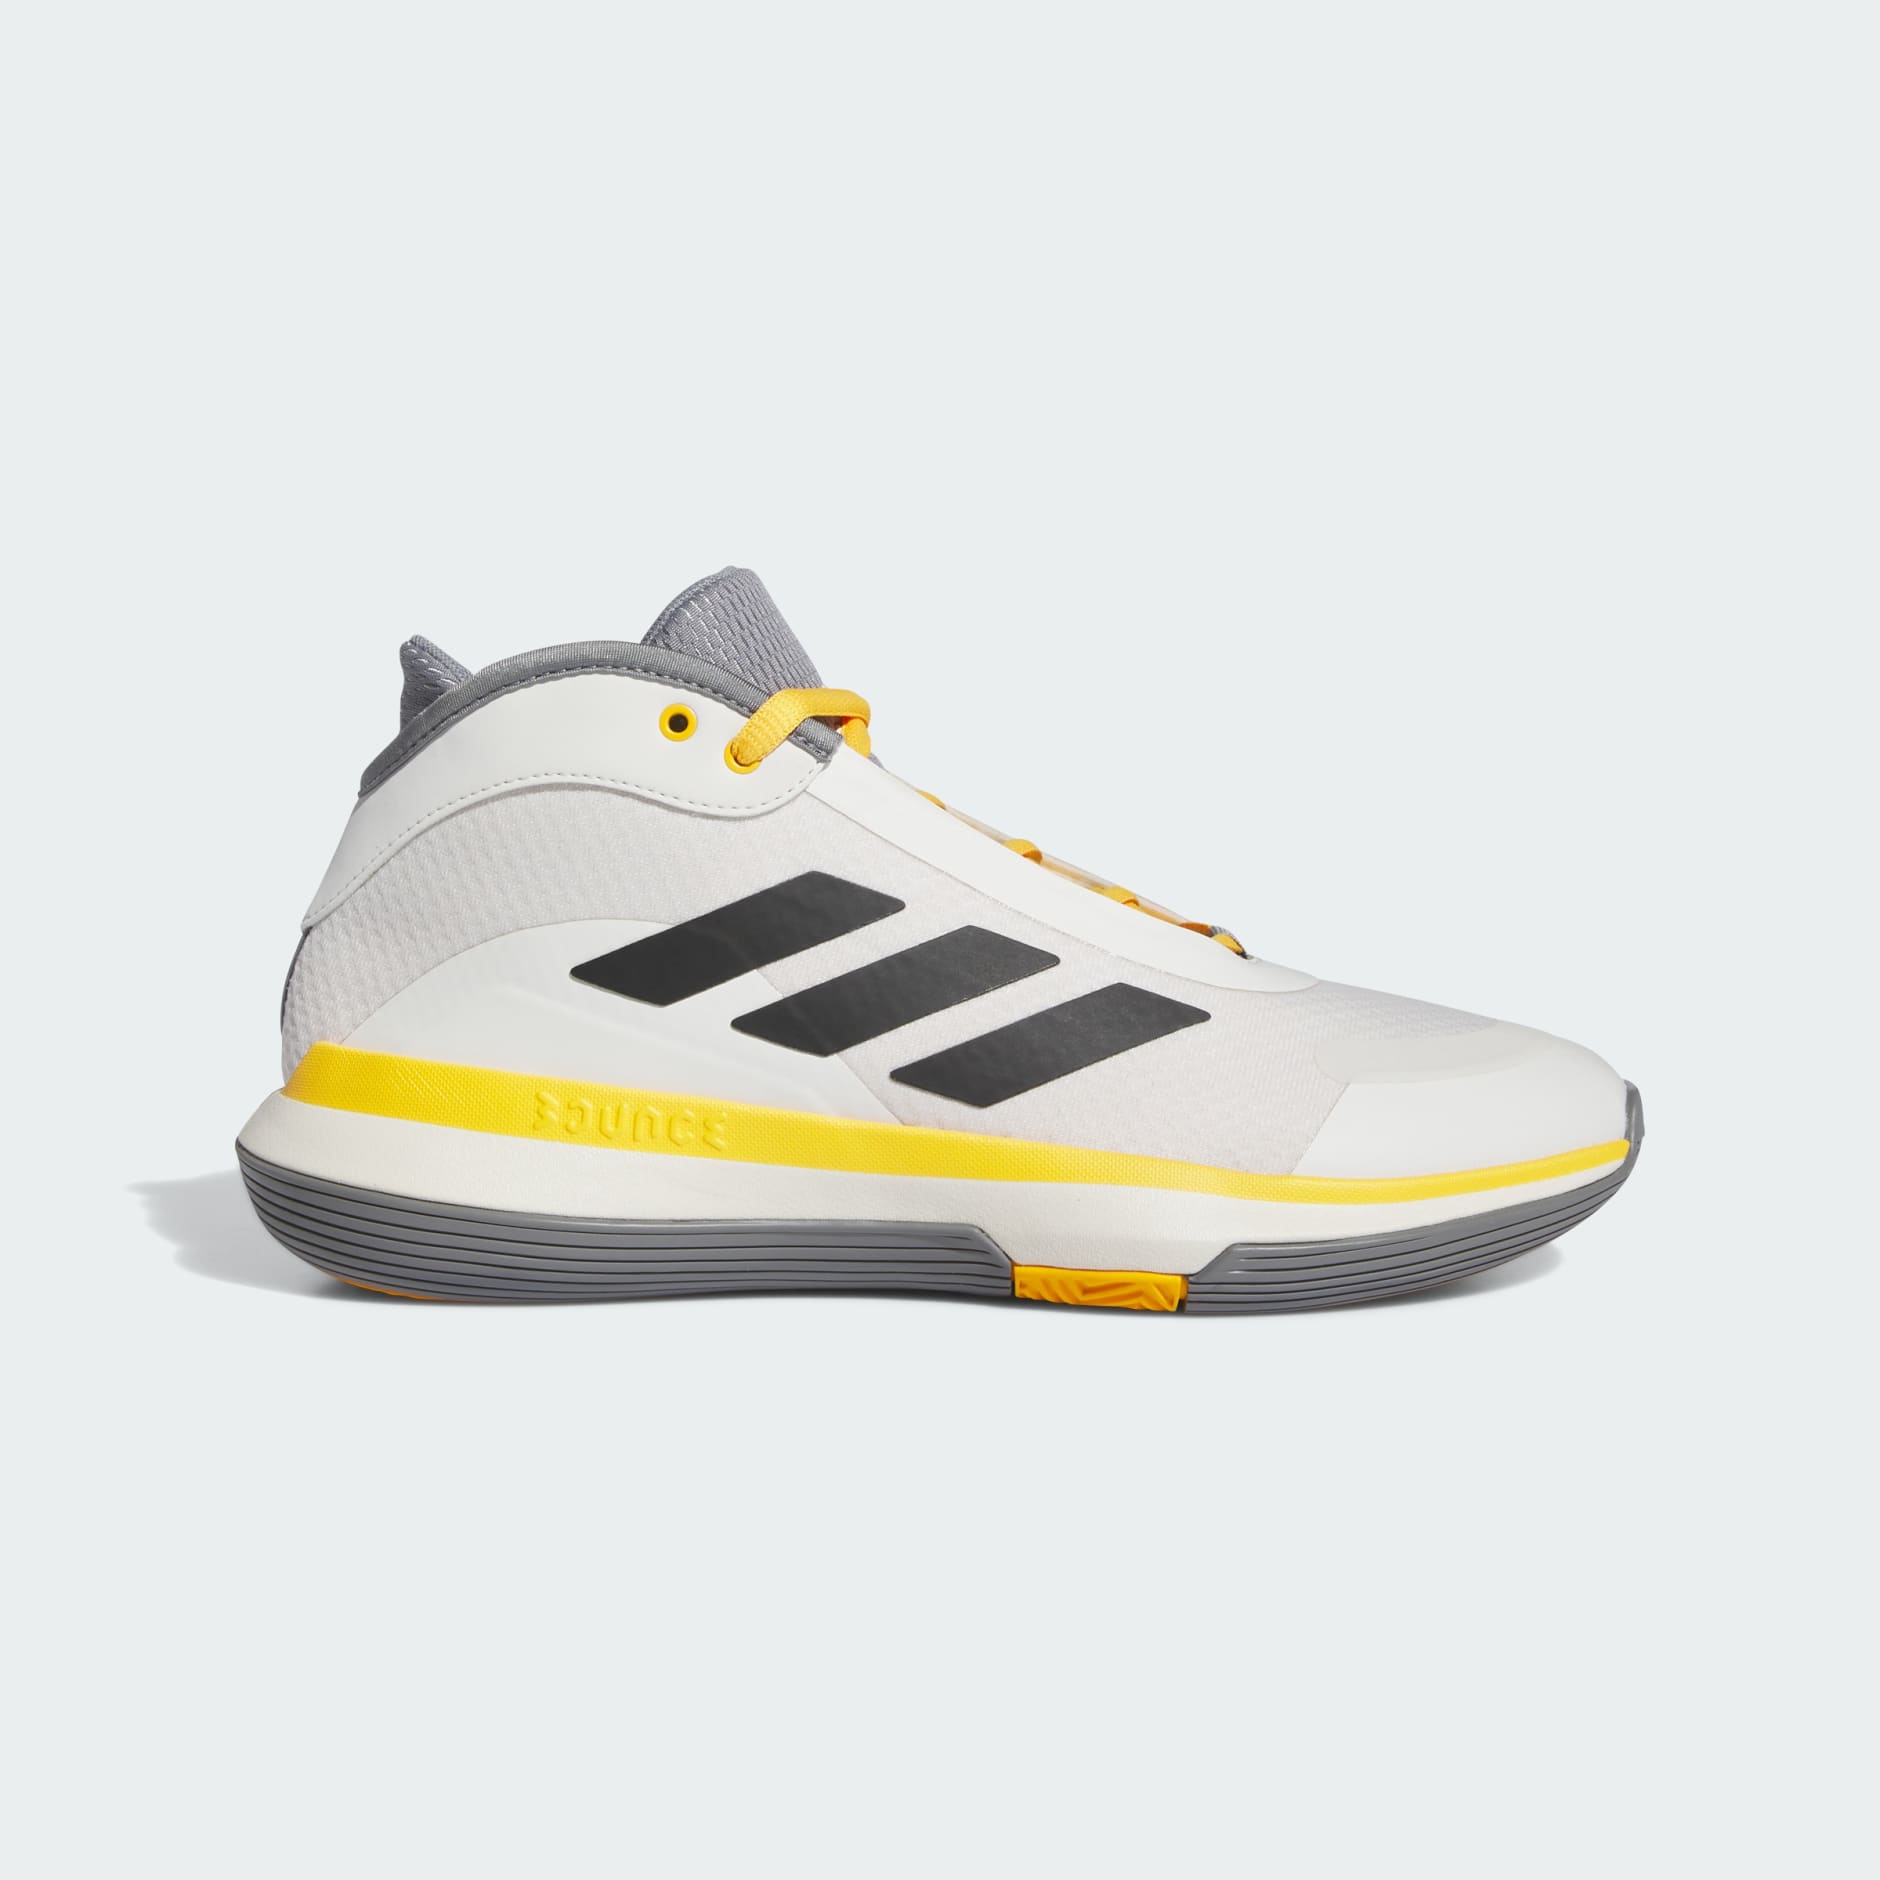 Shoes - Bounce Legends Shoes - White | adidas South Africa